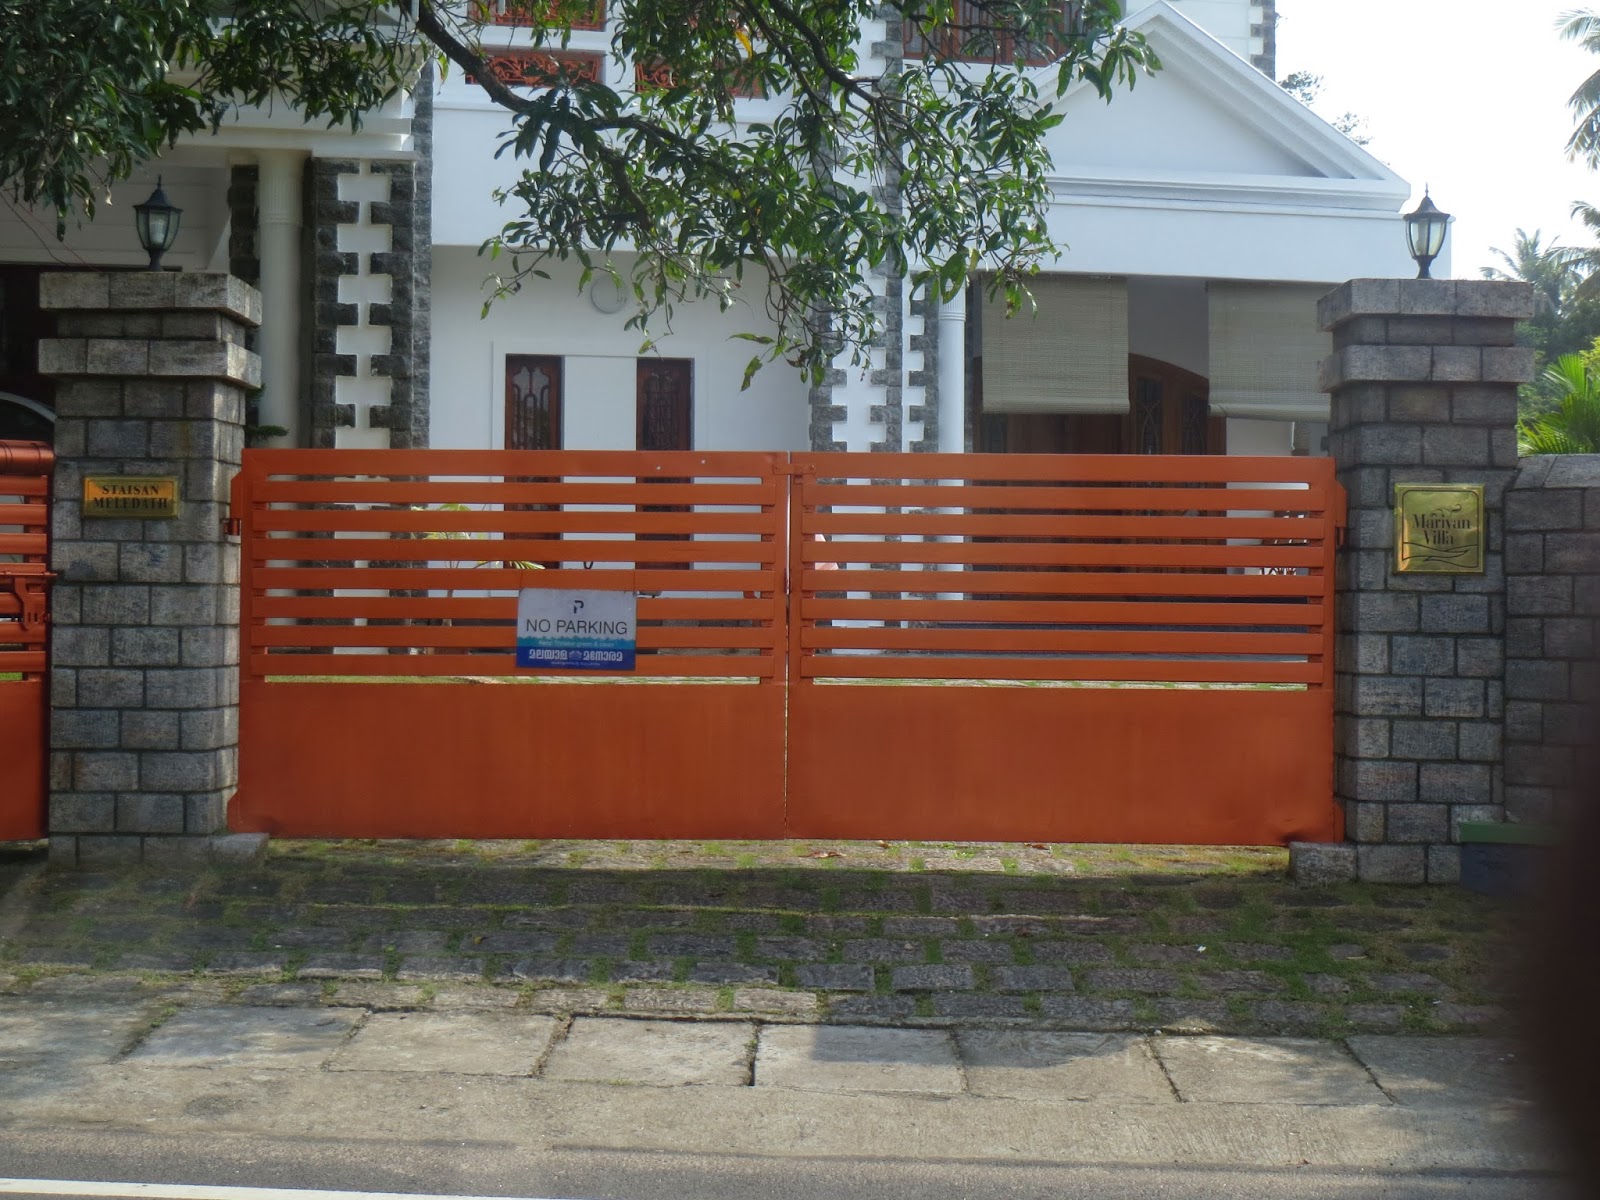 Kerala Gate Designs: Different types of gates in Kerala, India.